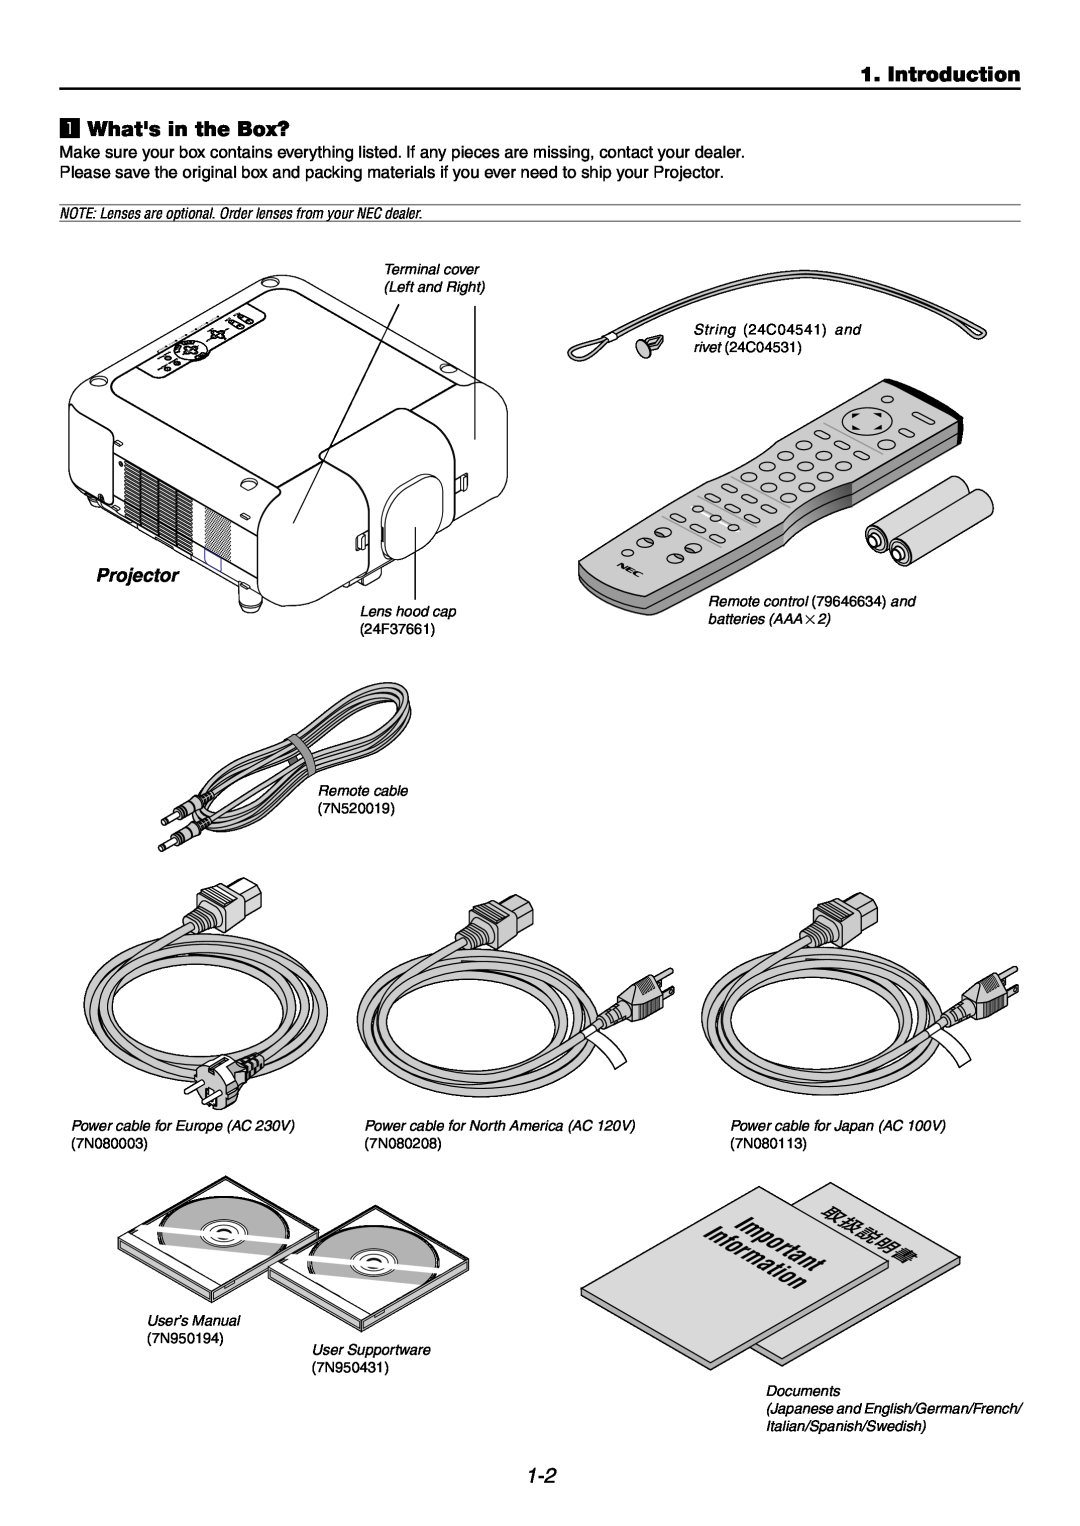 NEC GT6000 user manual InformationImportant, Introduction z Whats in the Box?, Projector 